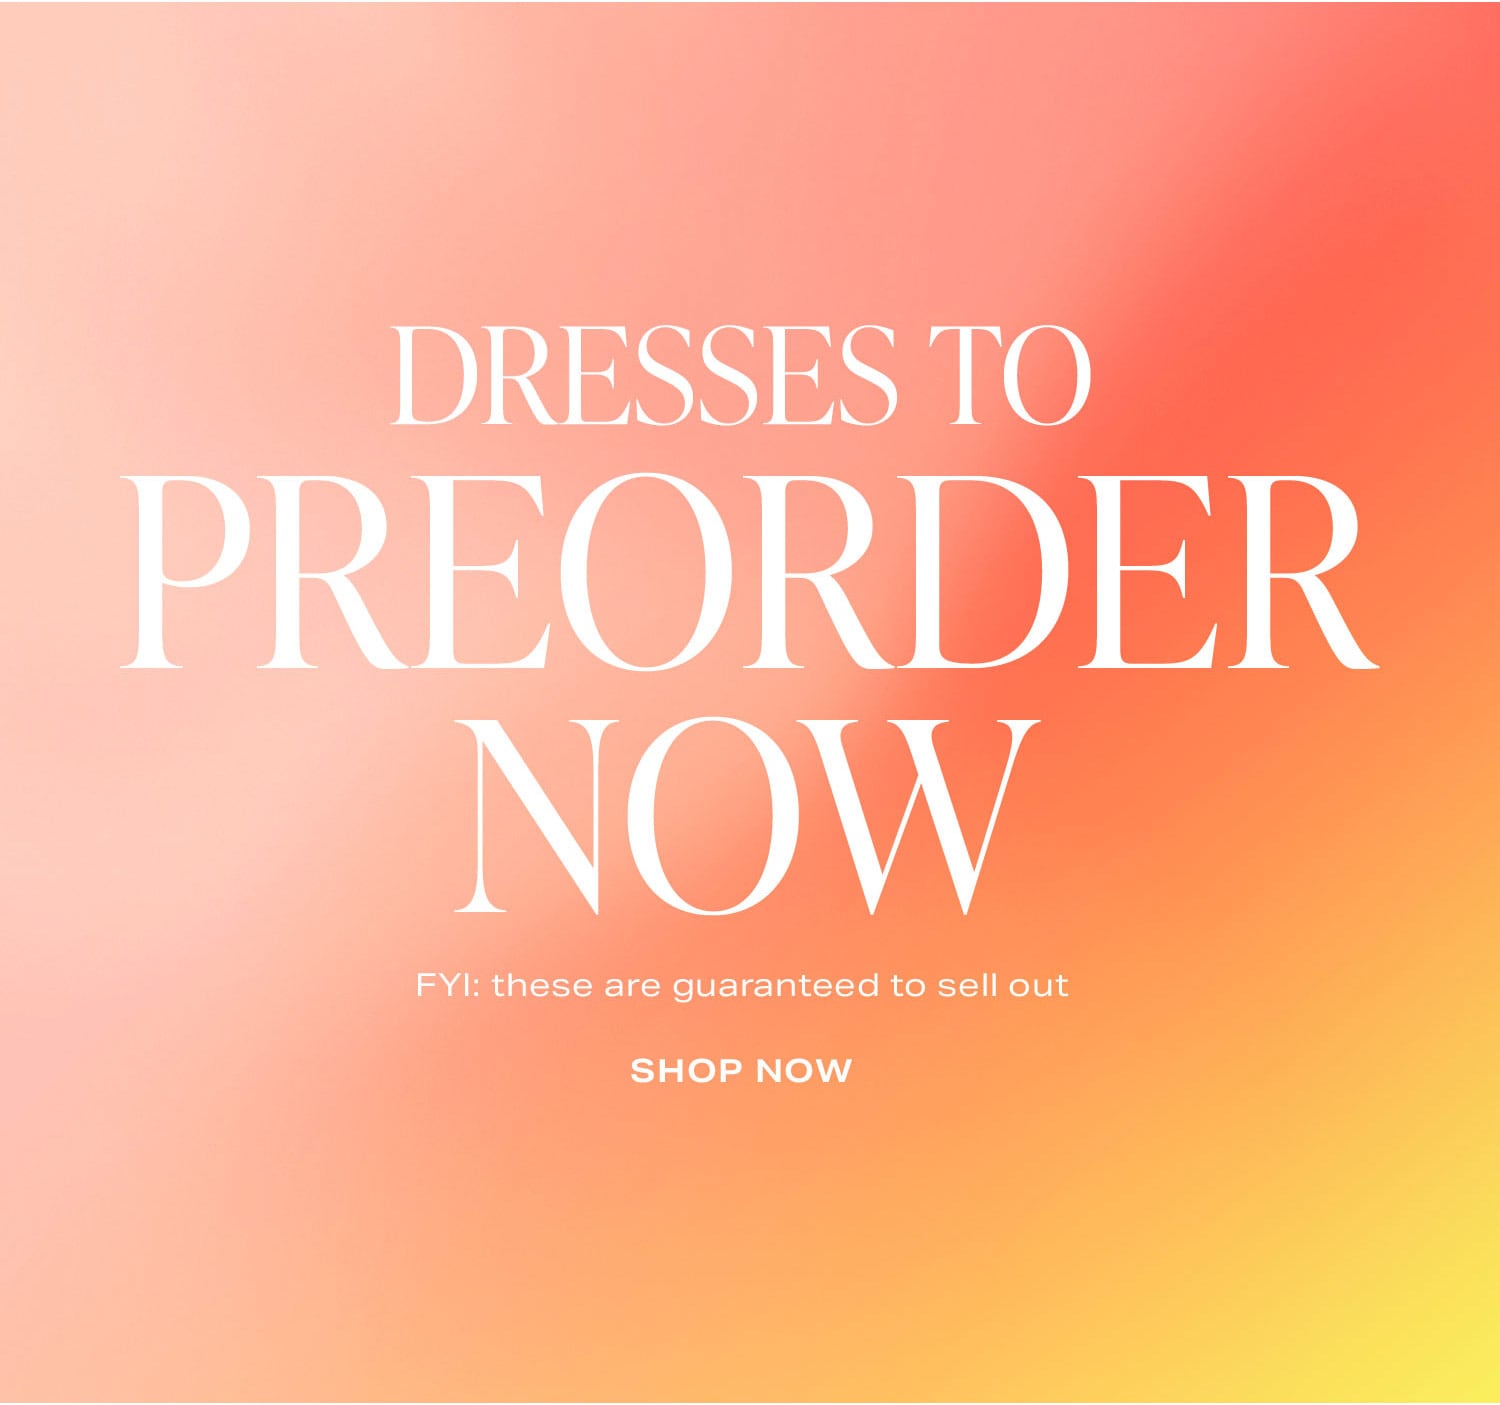  Dresses to Preorder Now! FYI: these are guaranteed to sell out. Shop Now.